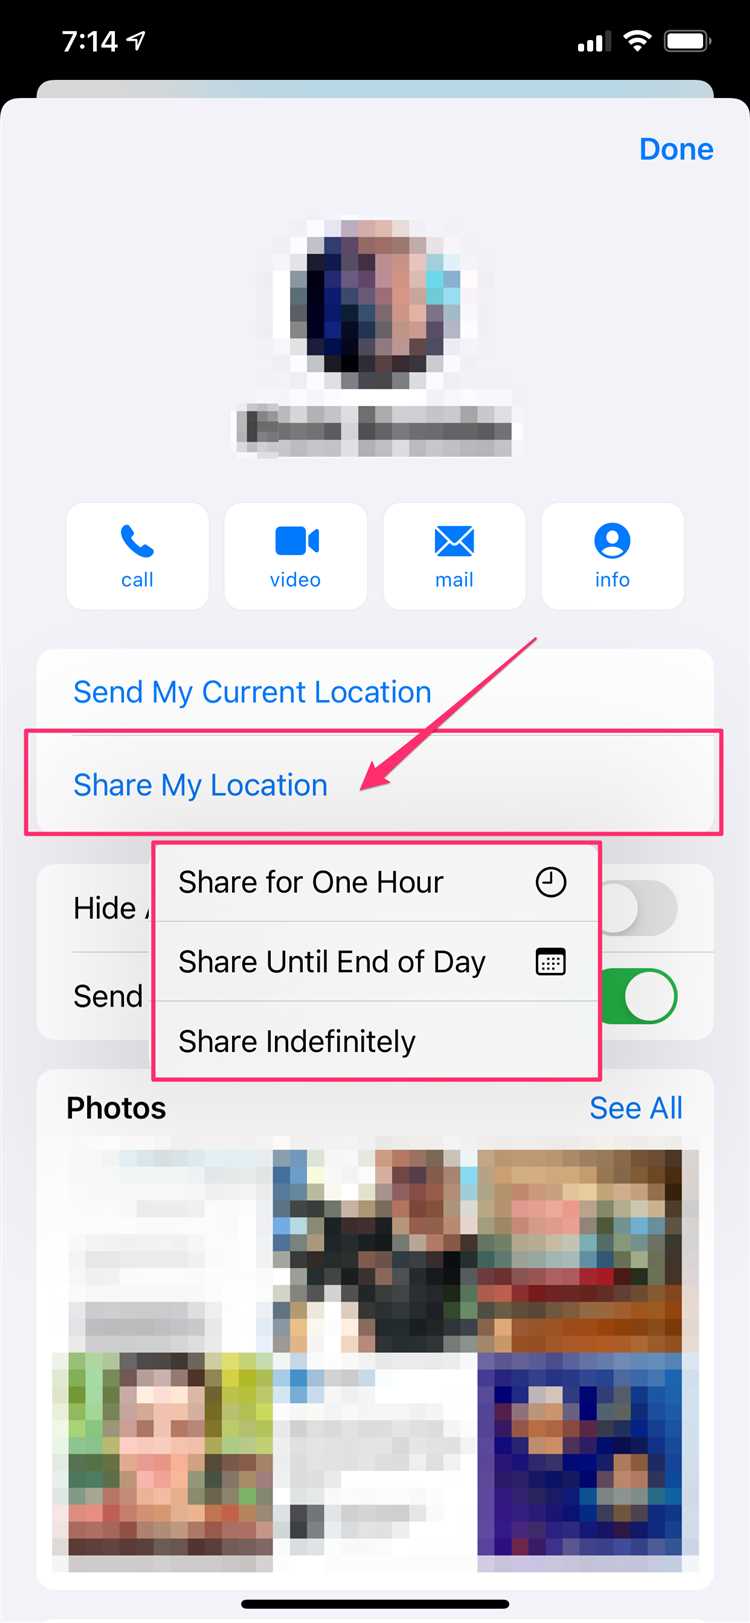 How do I send my exact location on iPhone?